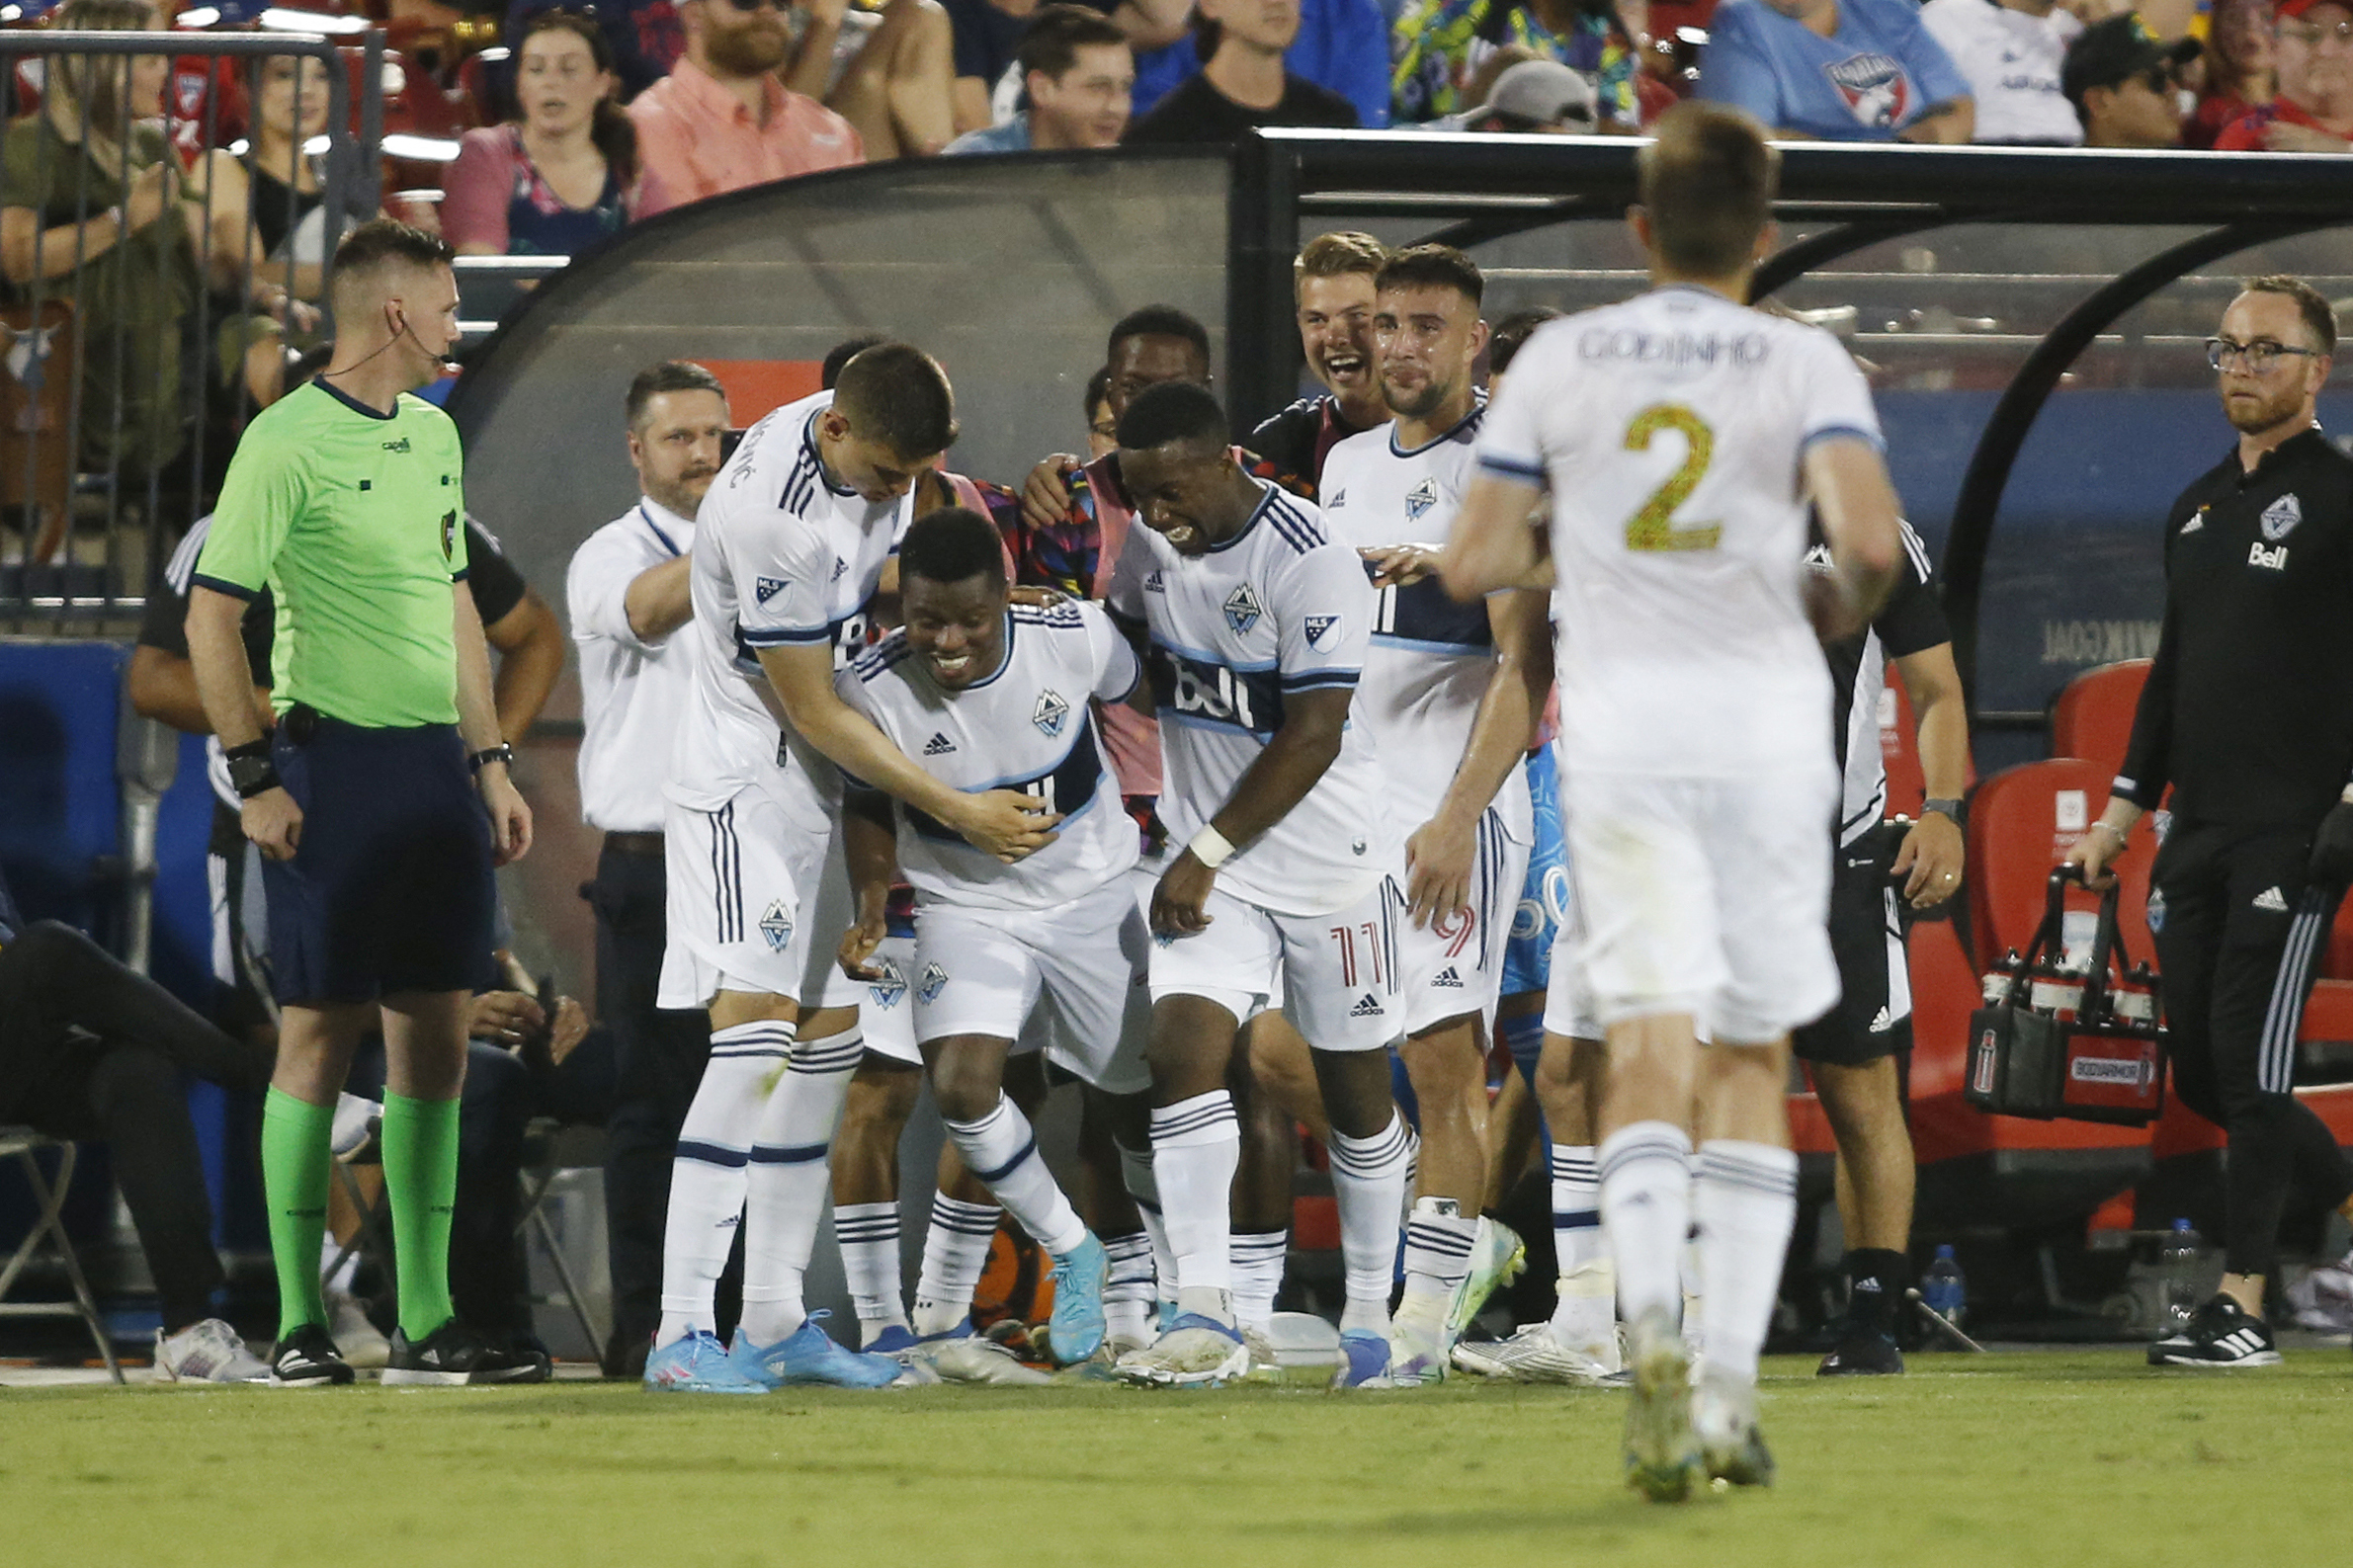 Jun 18, 2022; Frisco, Texas, USA; Vancouver Whitecaps forward Deiber Caicedo (7) celebrates with teammates after scoring a goal against FC Dallas in the first half at Toyota Stadium. Mandatory Credit: Tim Heitman-USA TODAY Sports